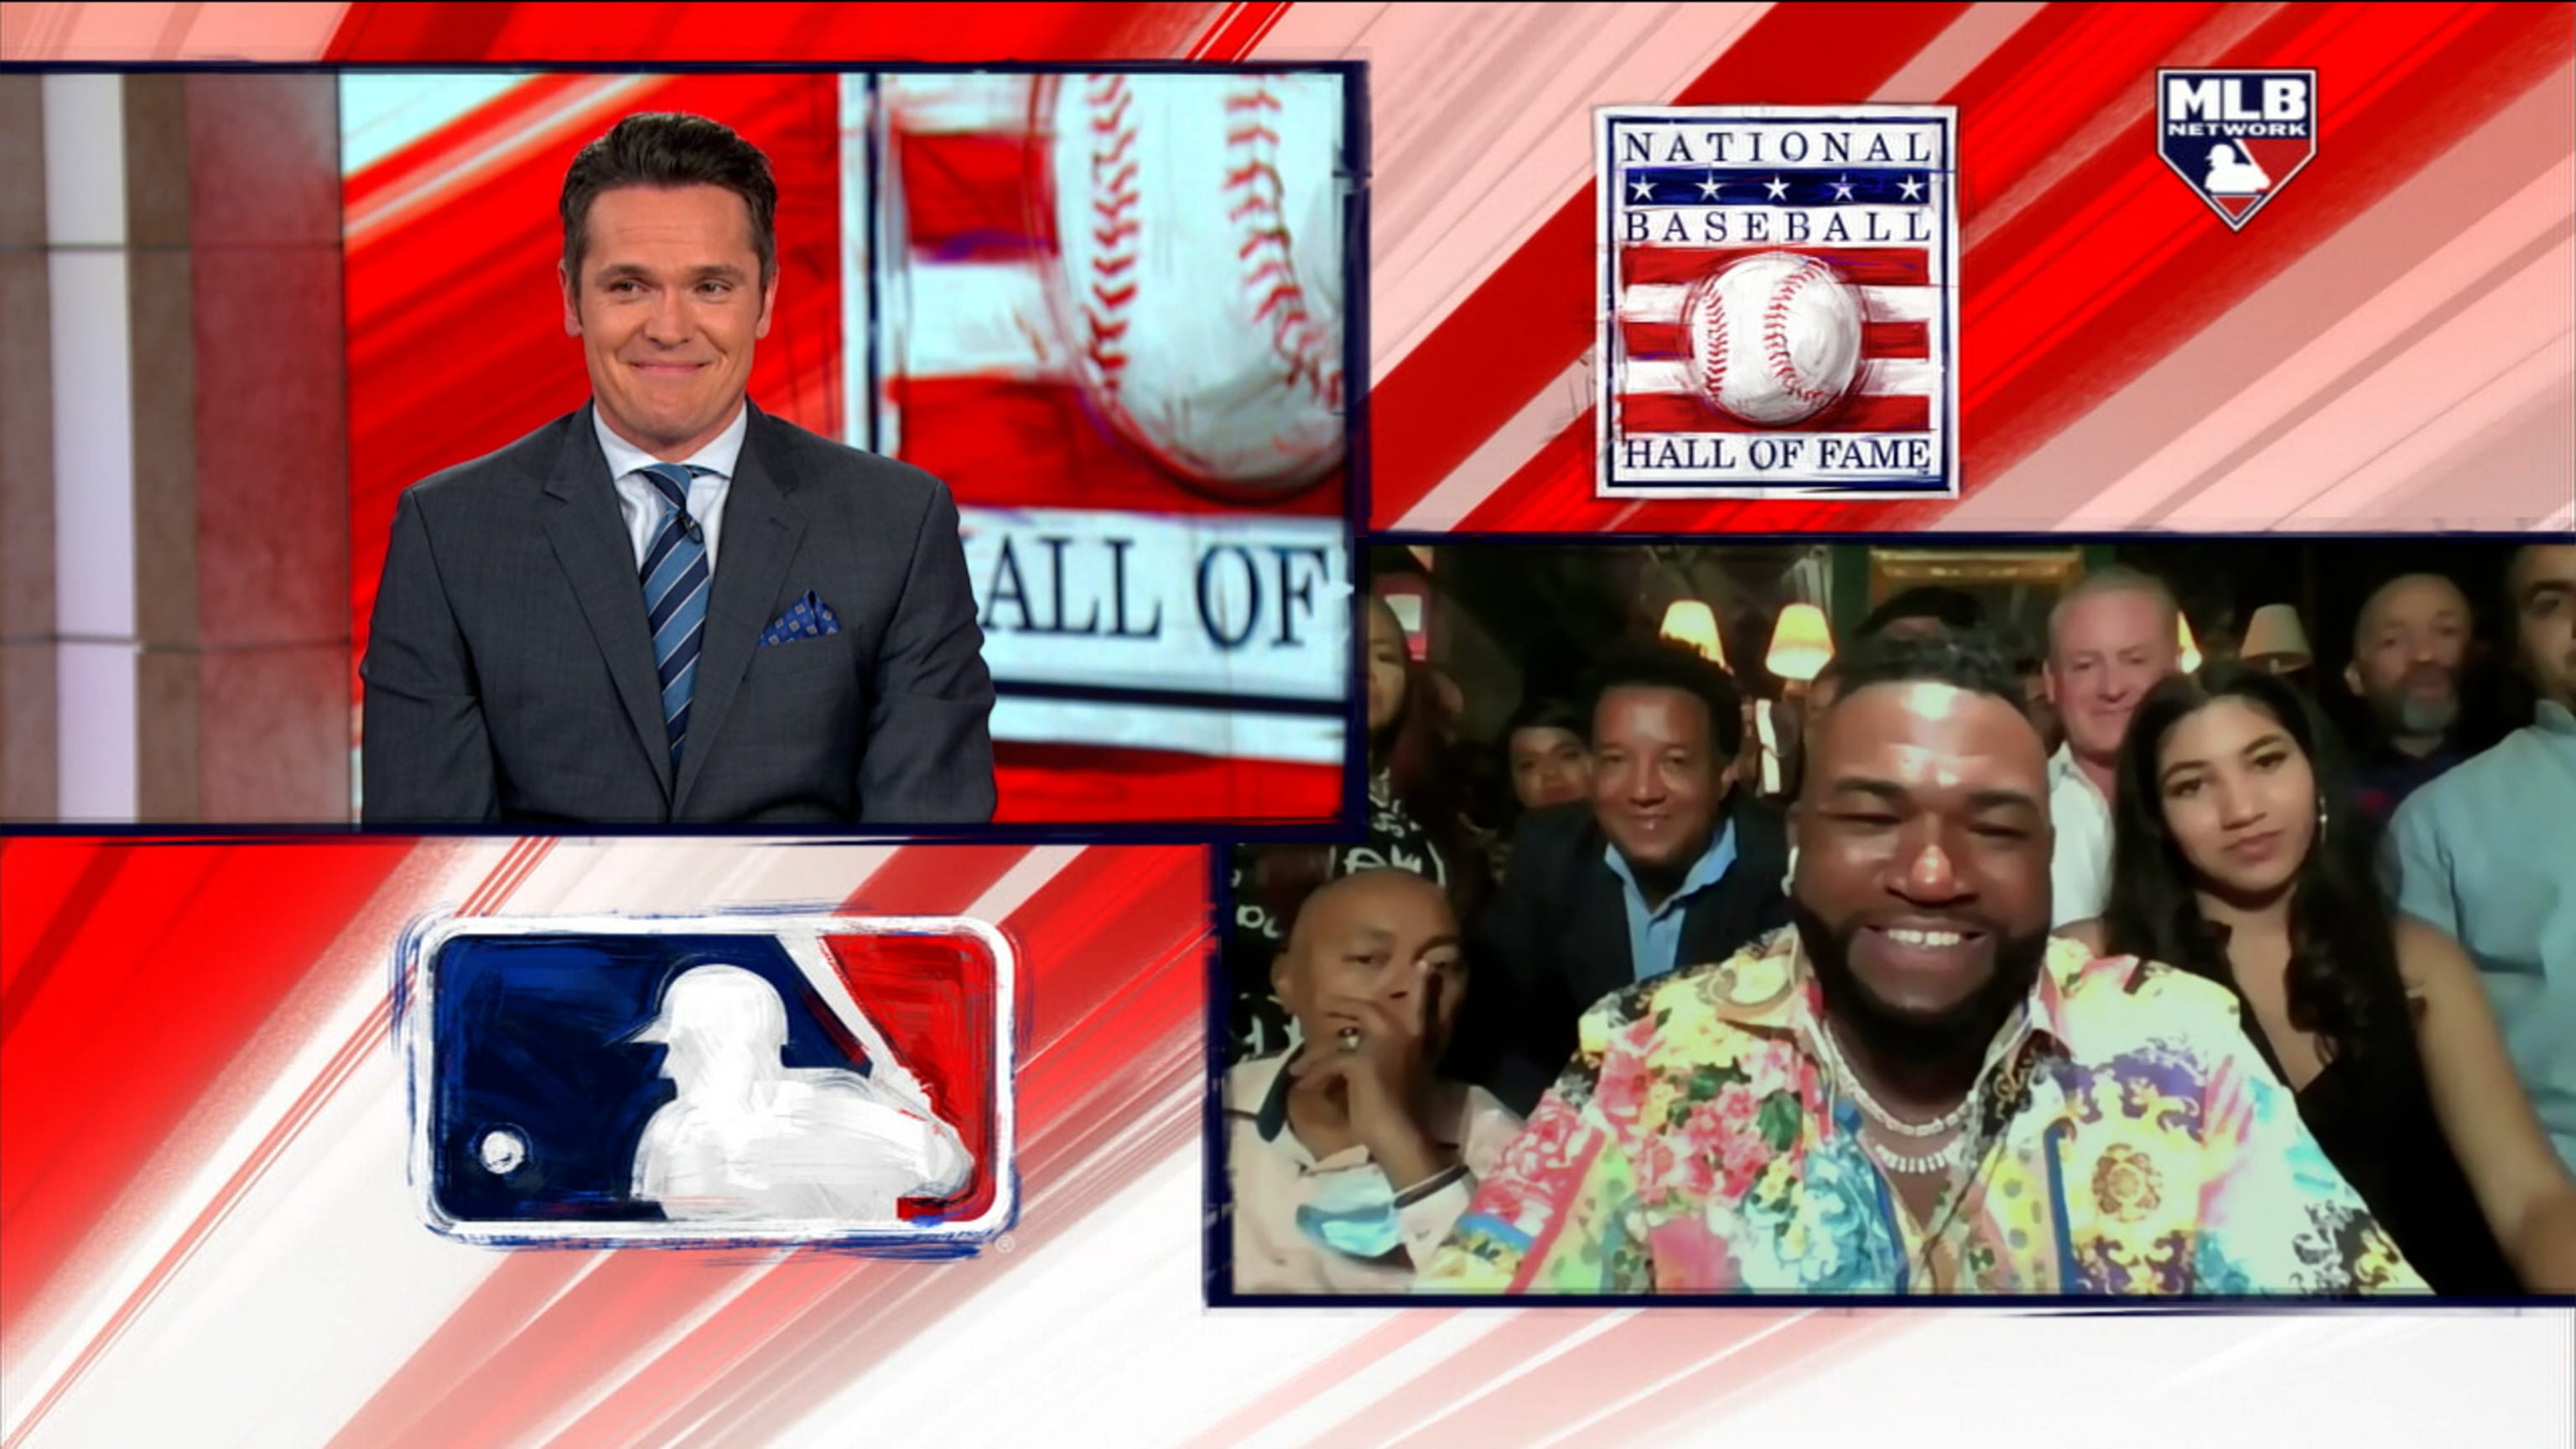 Boston Red Sox icon David Ortiz elected to Baseball Hall of Fame